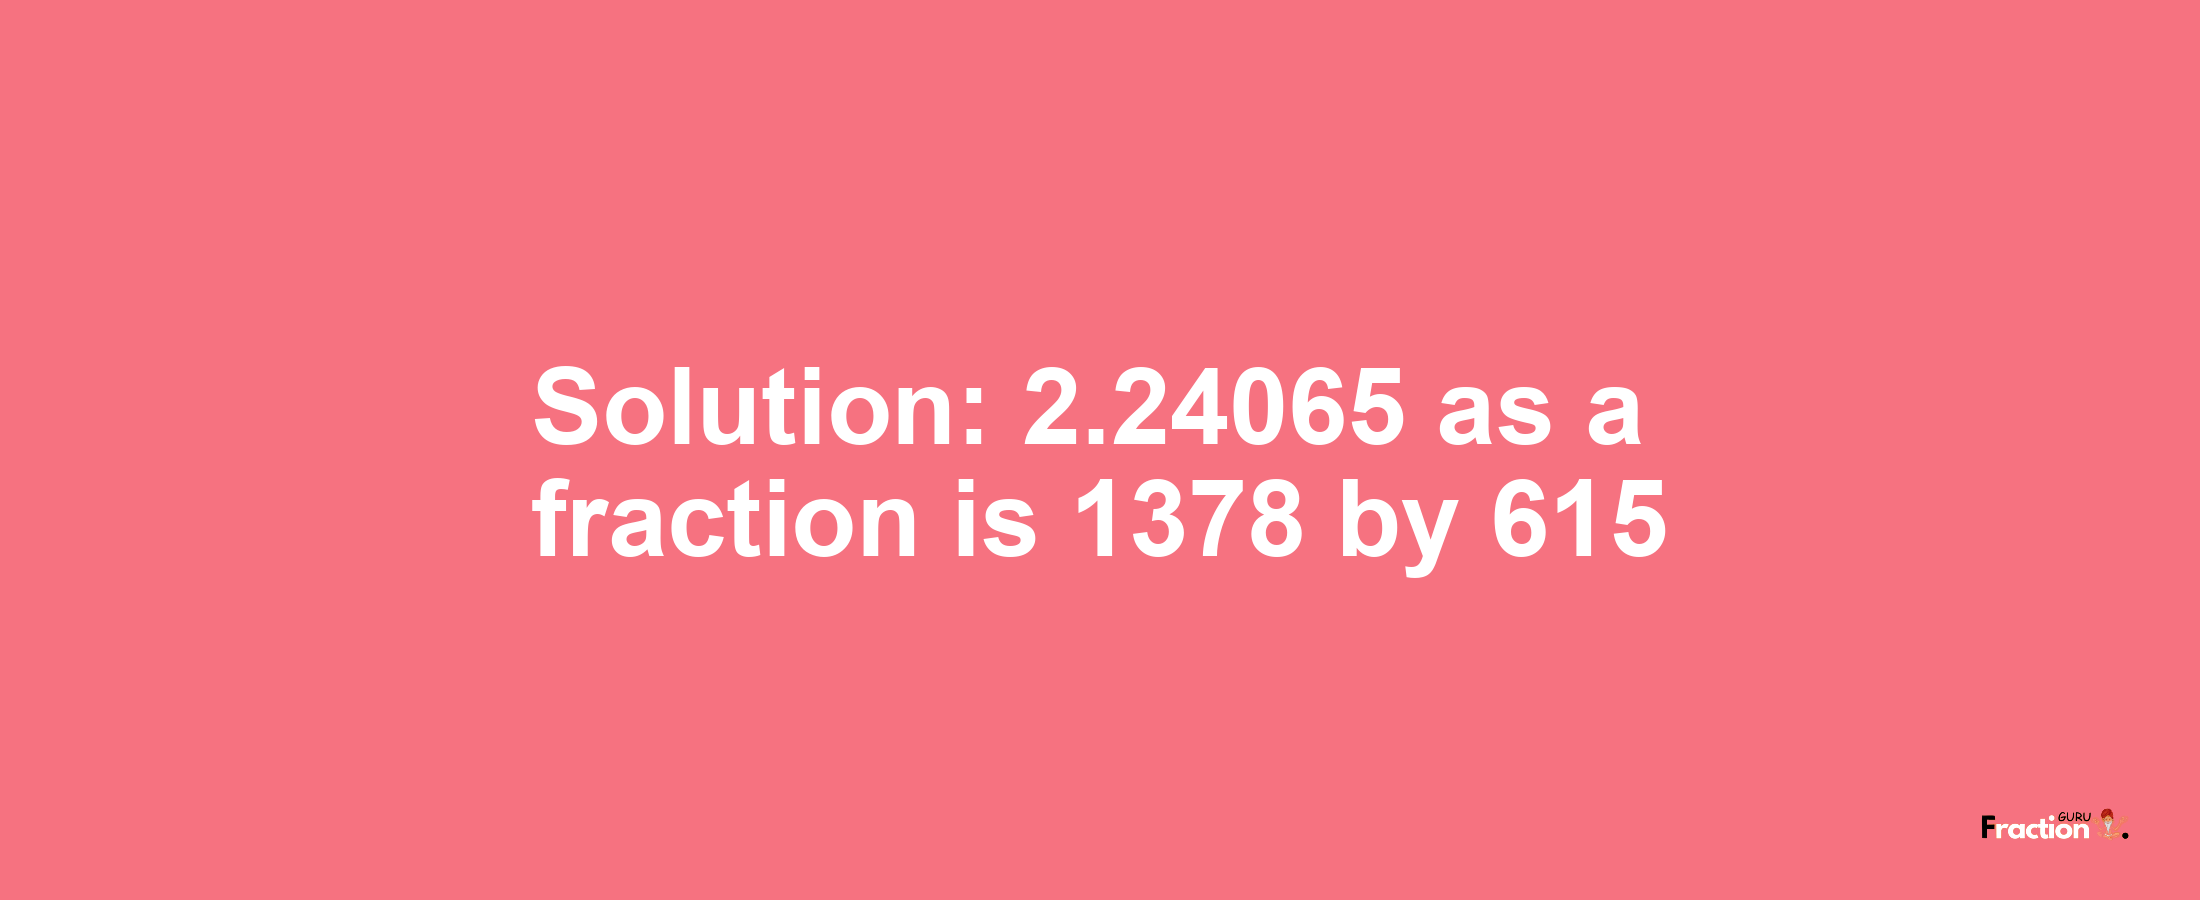 Solution:2.24065 as a fraction is 1378/615